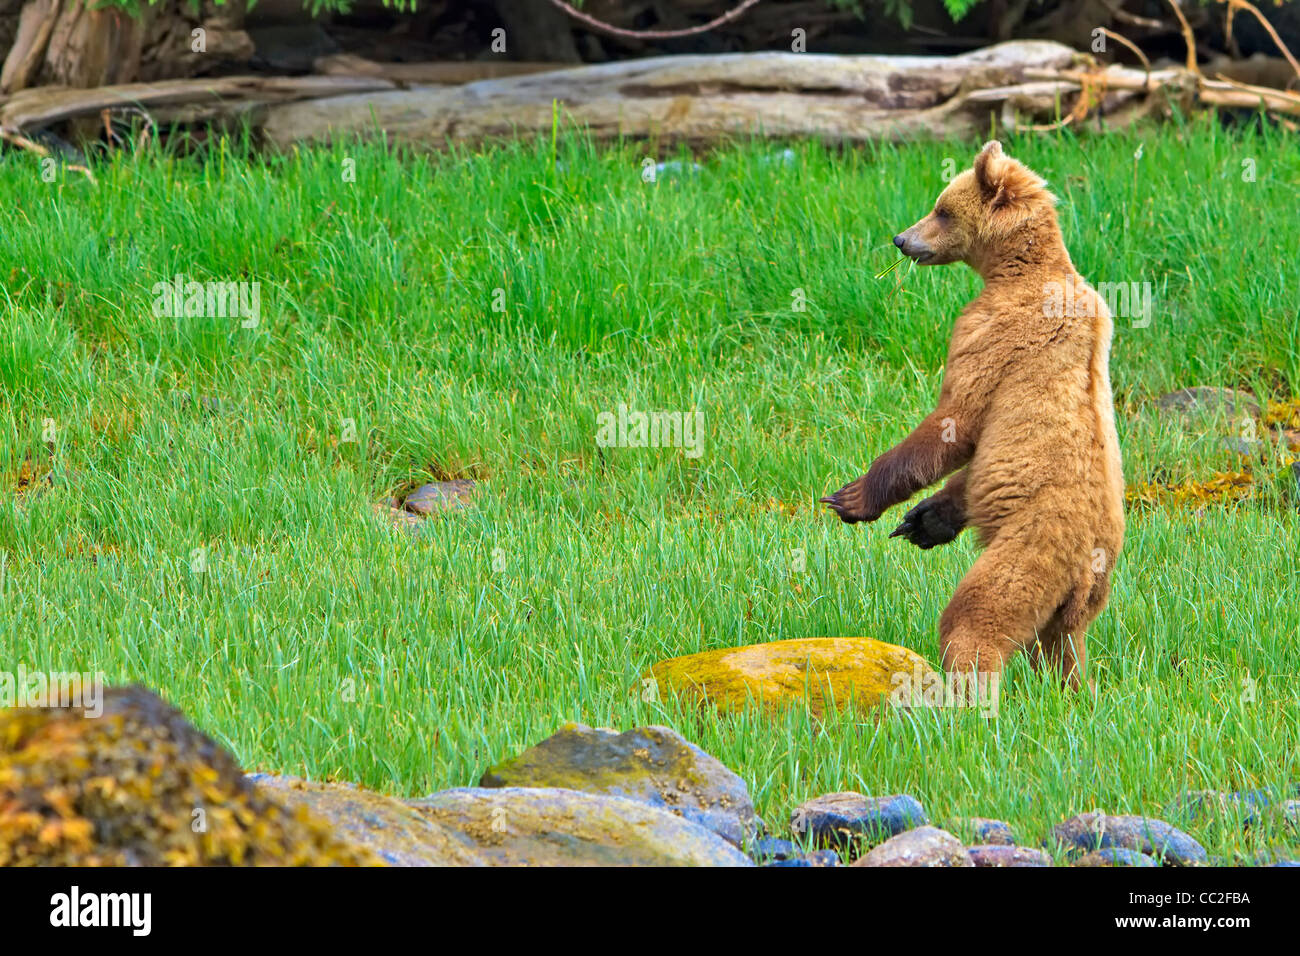 Coastal Grizzly bear (Ursus arctos)standing up in a green sanctuary, checking the situation, British Columbia Mainland, Canada Stock Photo